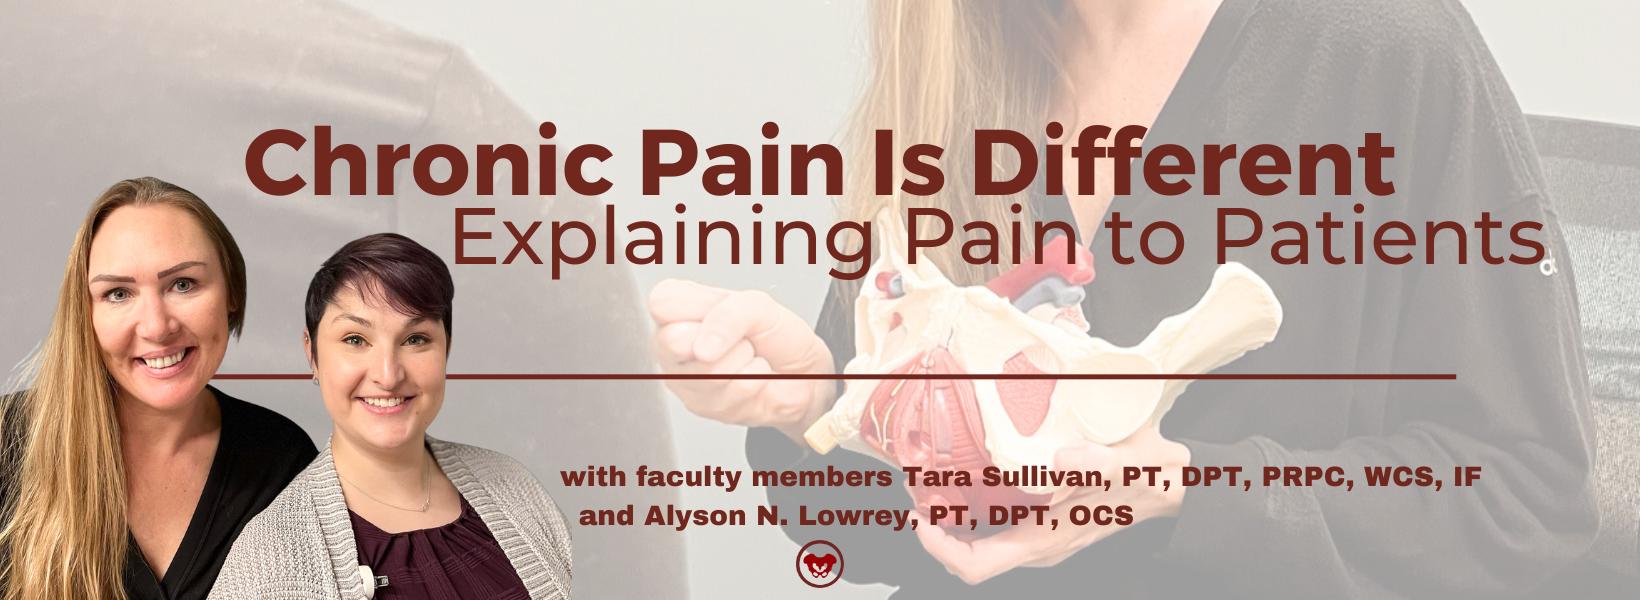 Chronic Pain Is Different - Explaining Pain to Patients